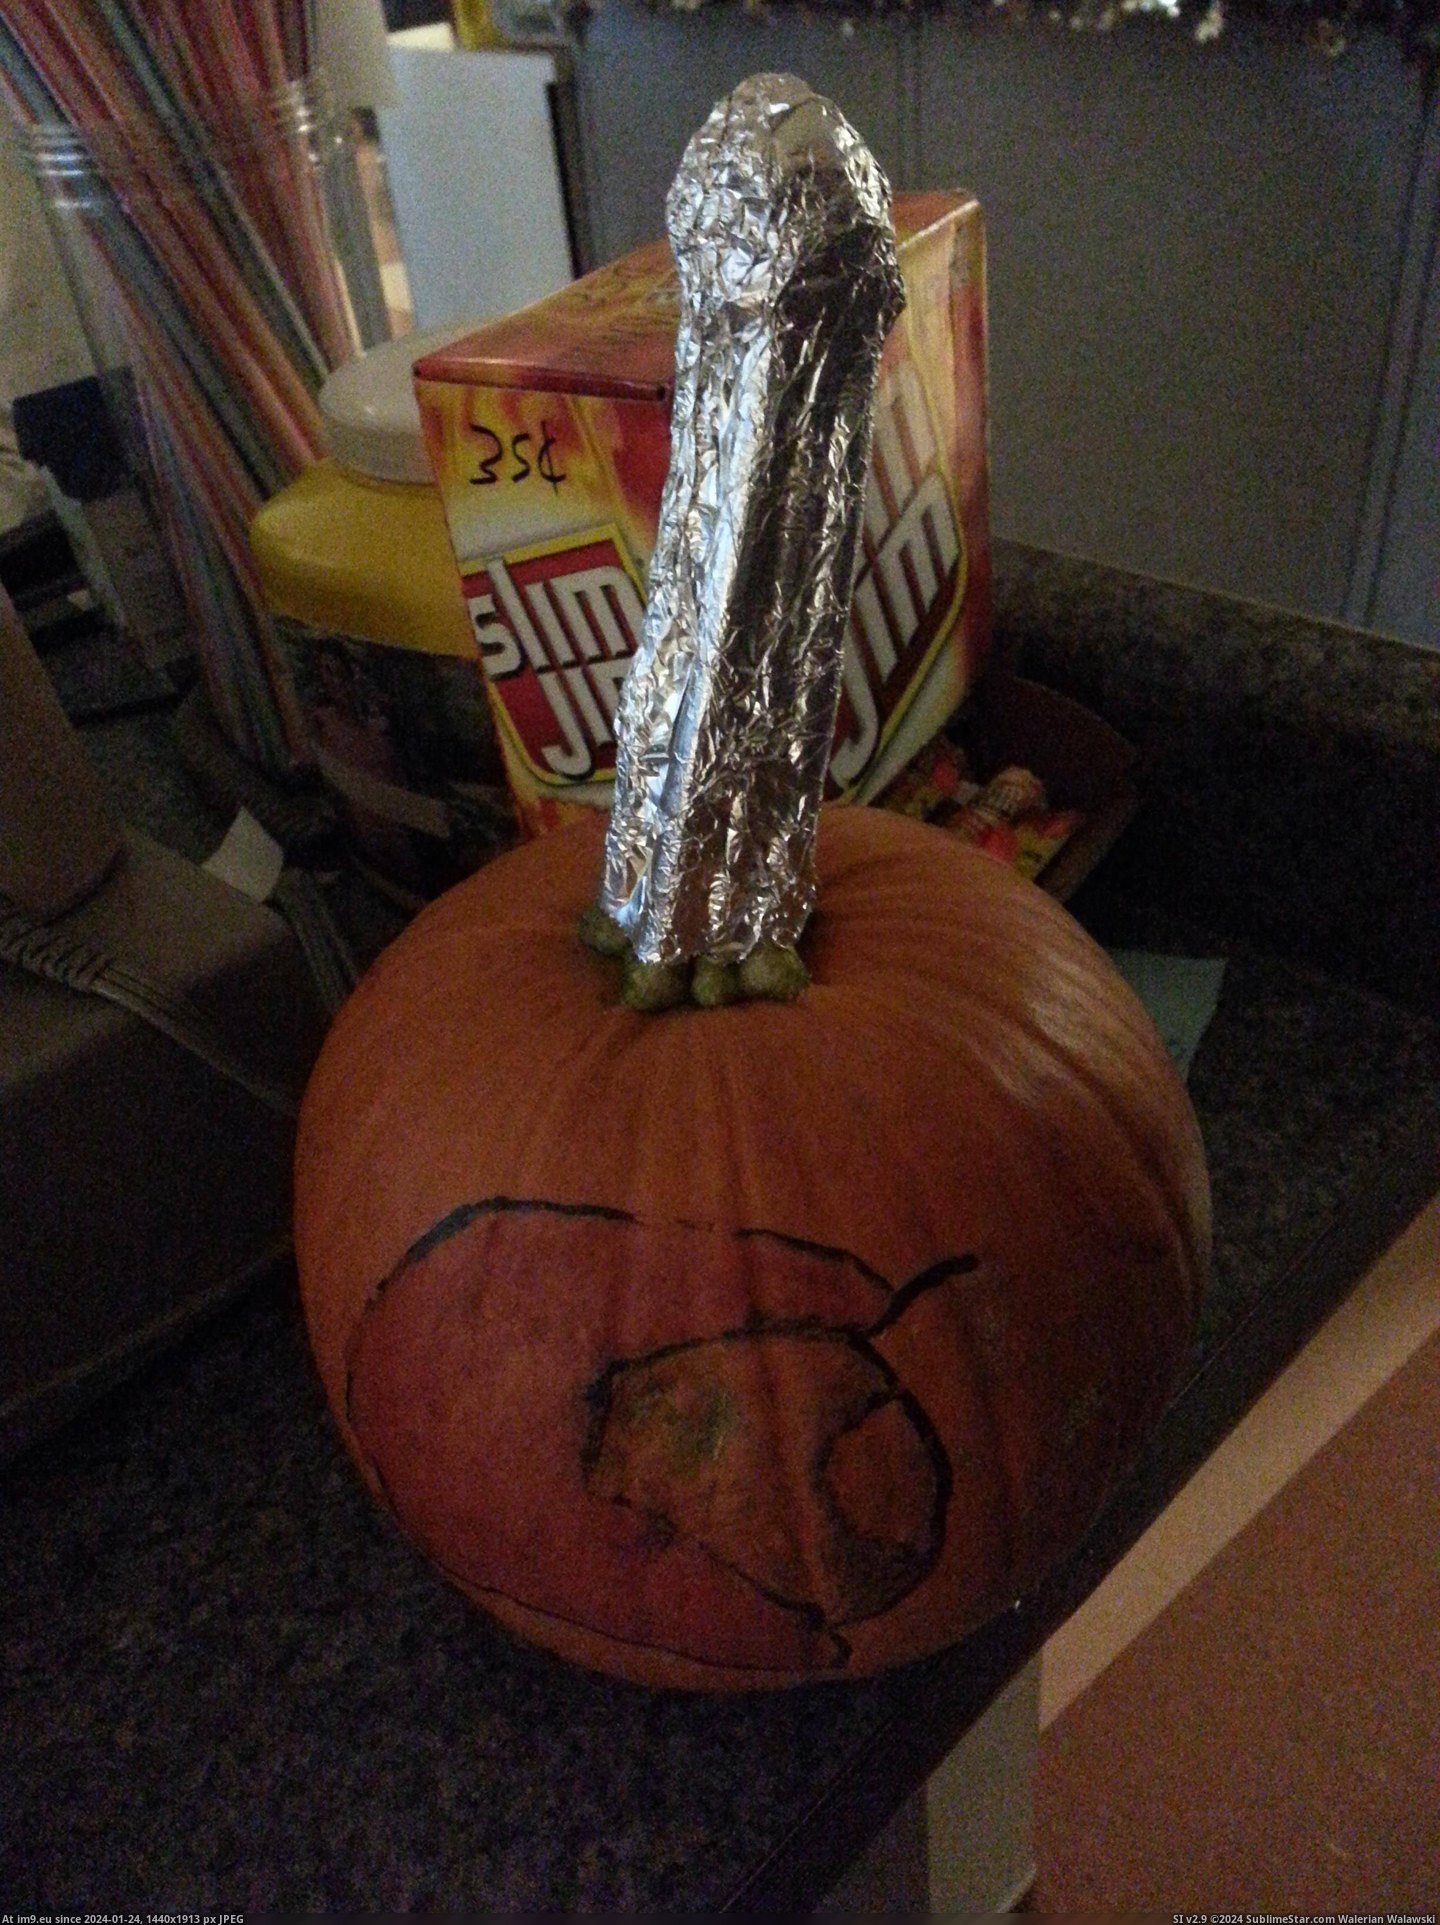 #Wtf #School #Pumpkin #Room #Lunch [Wtf] My school has this pumpkin by the register in the lunch room. Pic. (Изображение из альбом My r/WTF favs))